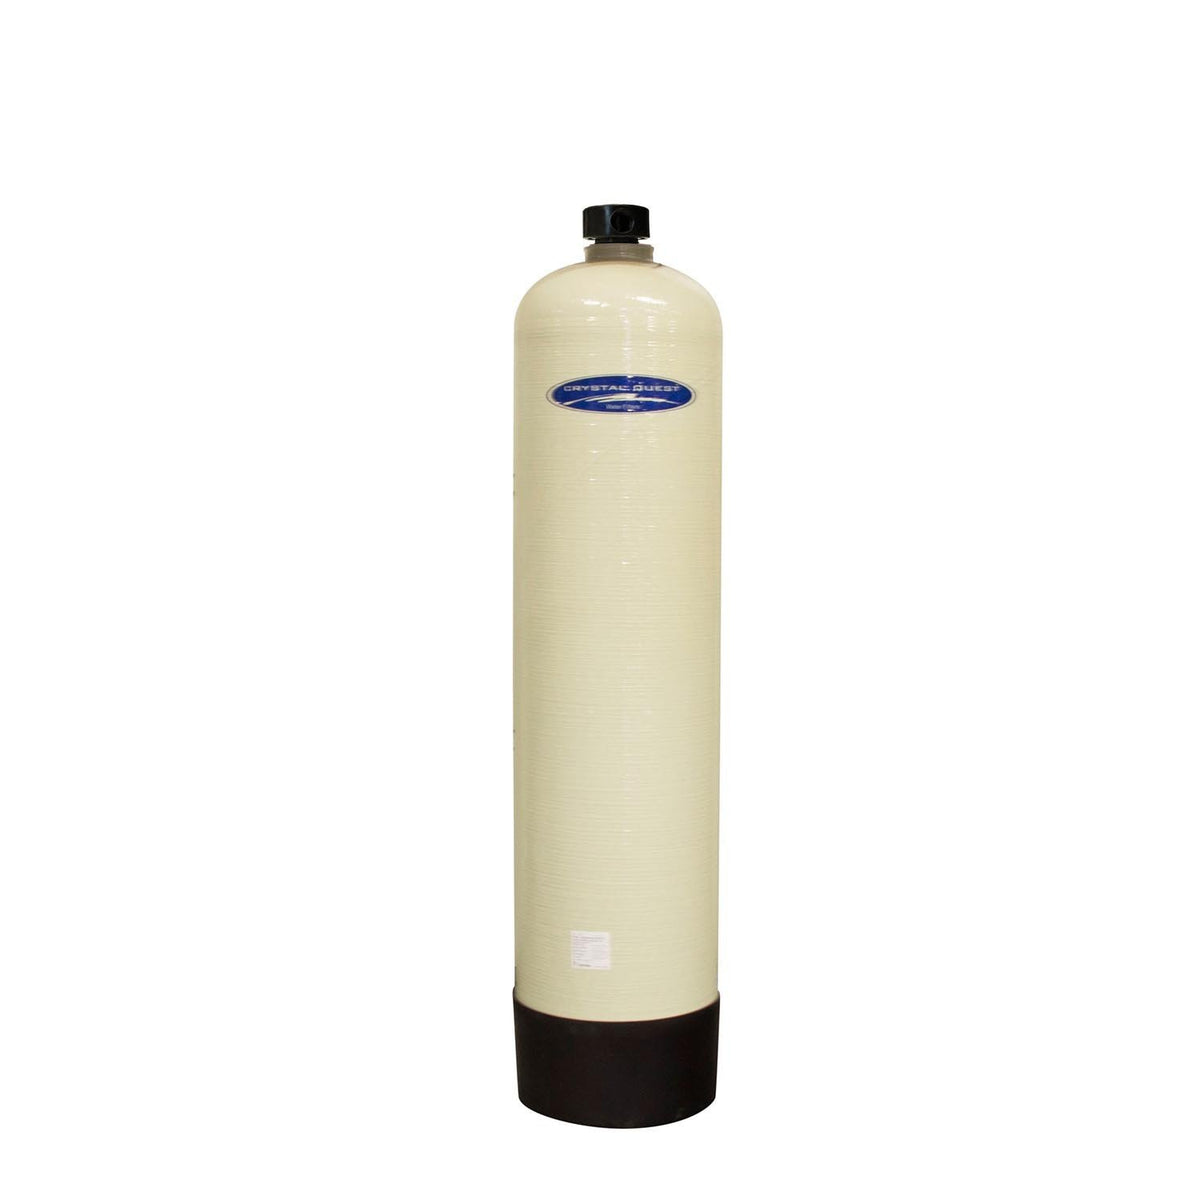 50 GPM Commercial Salt-Free Water Softener (Anti-Scale) System | 16.5 liters - Commercial - Crystal Quest Water Filters